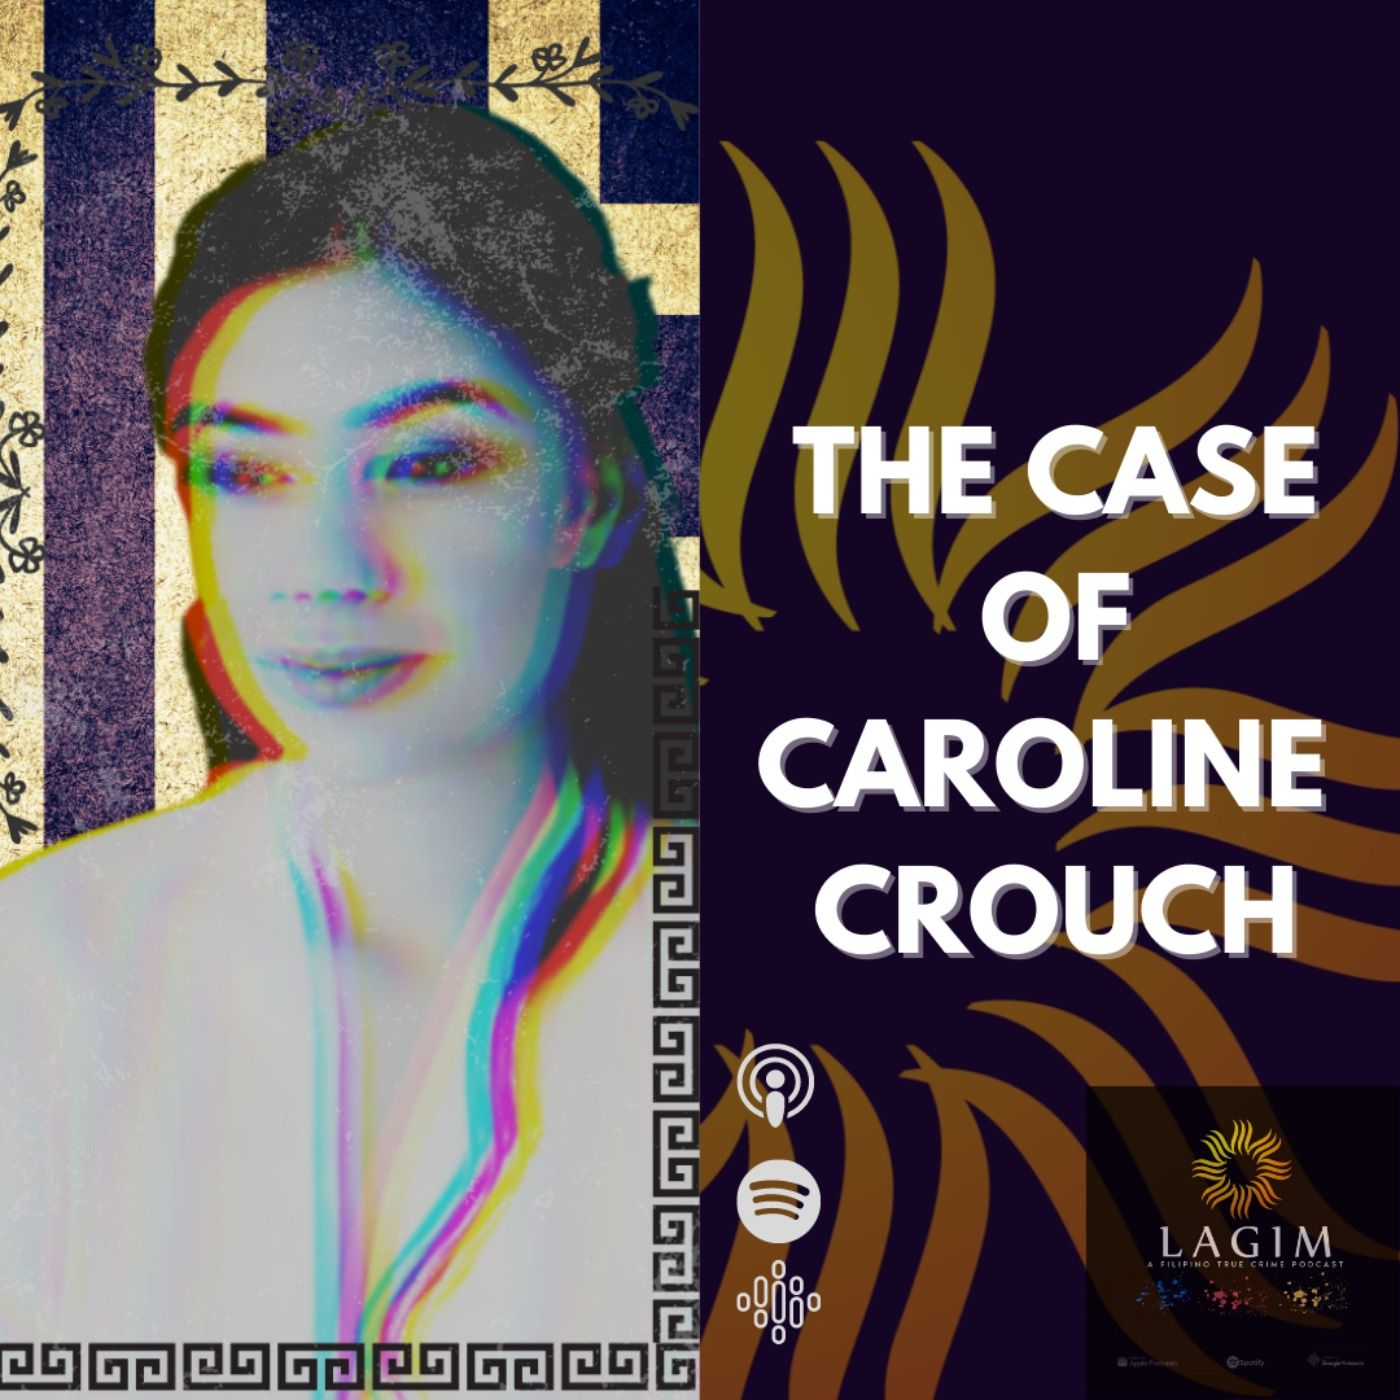 The Case of Caroline Crouch